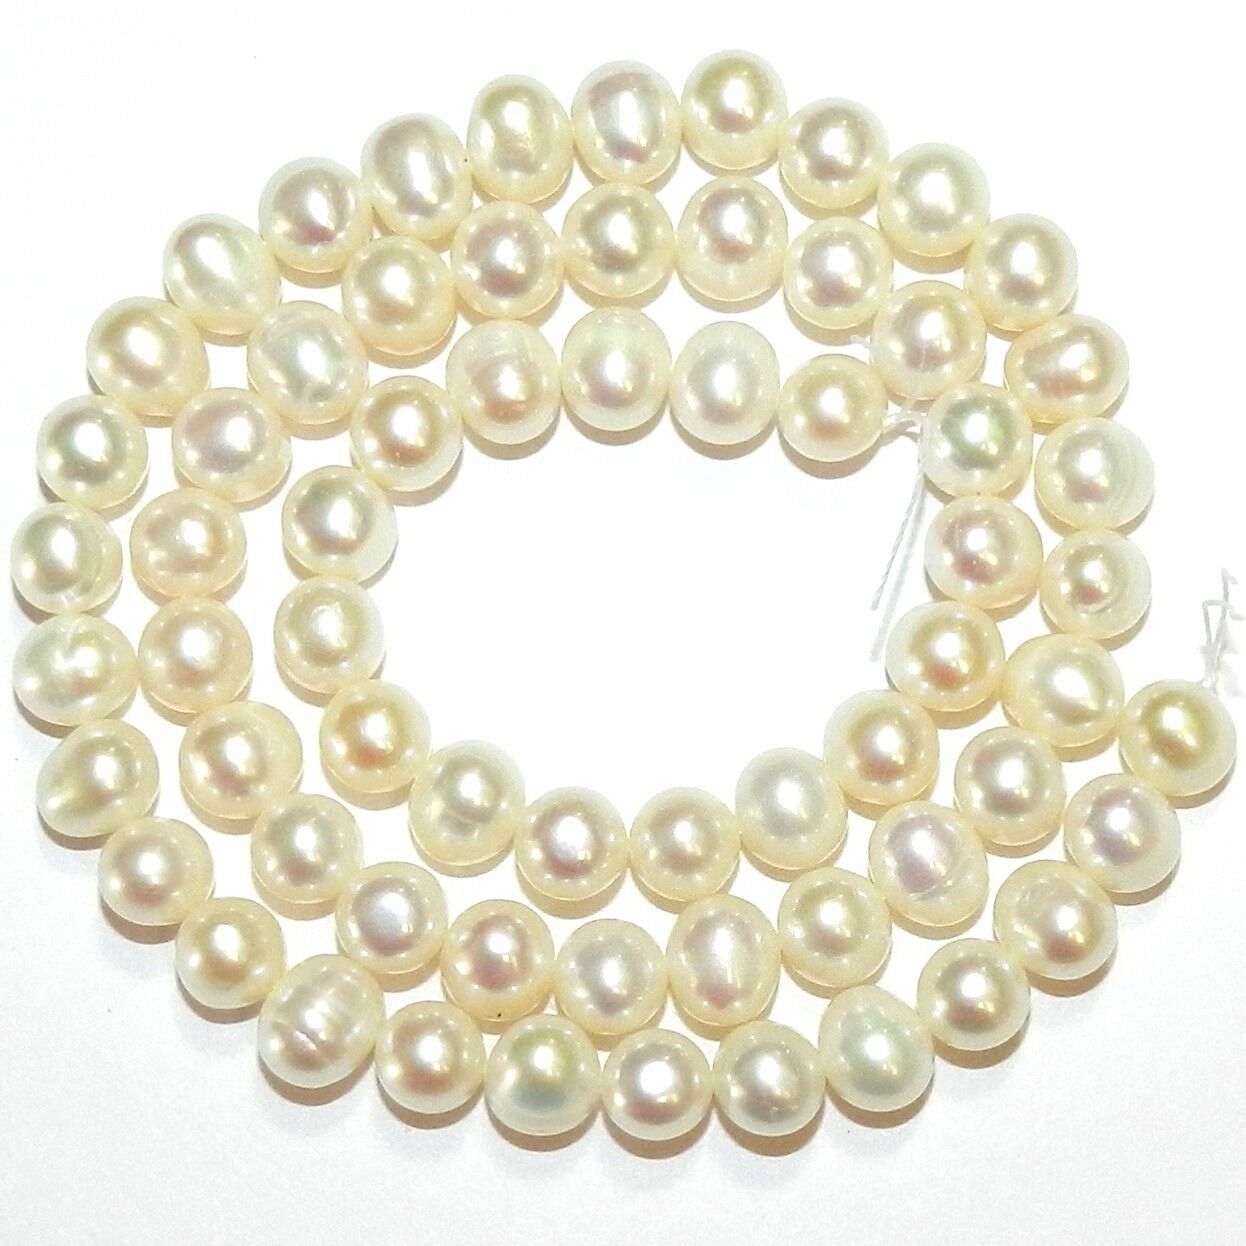 Np325 White 7mm Semi- Round Cultured Freshwater Pearl Drilled Beads 14"